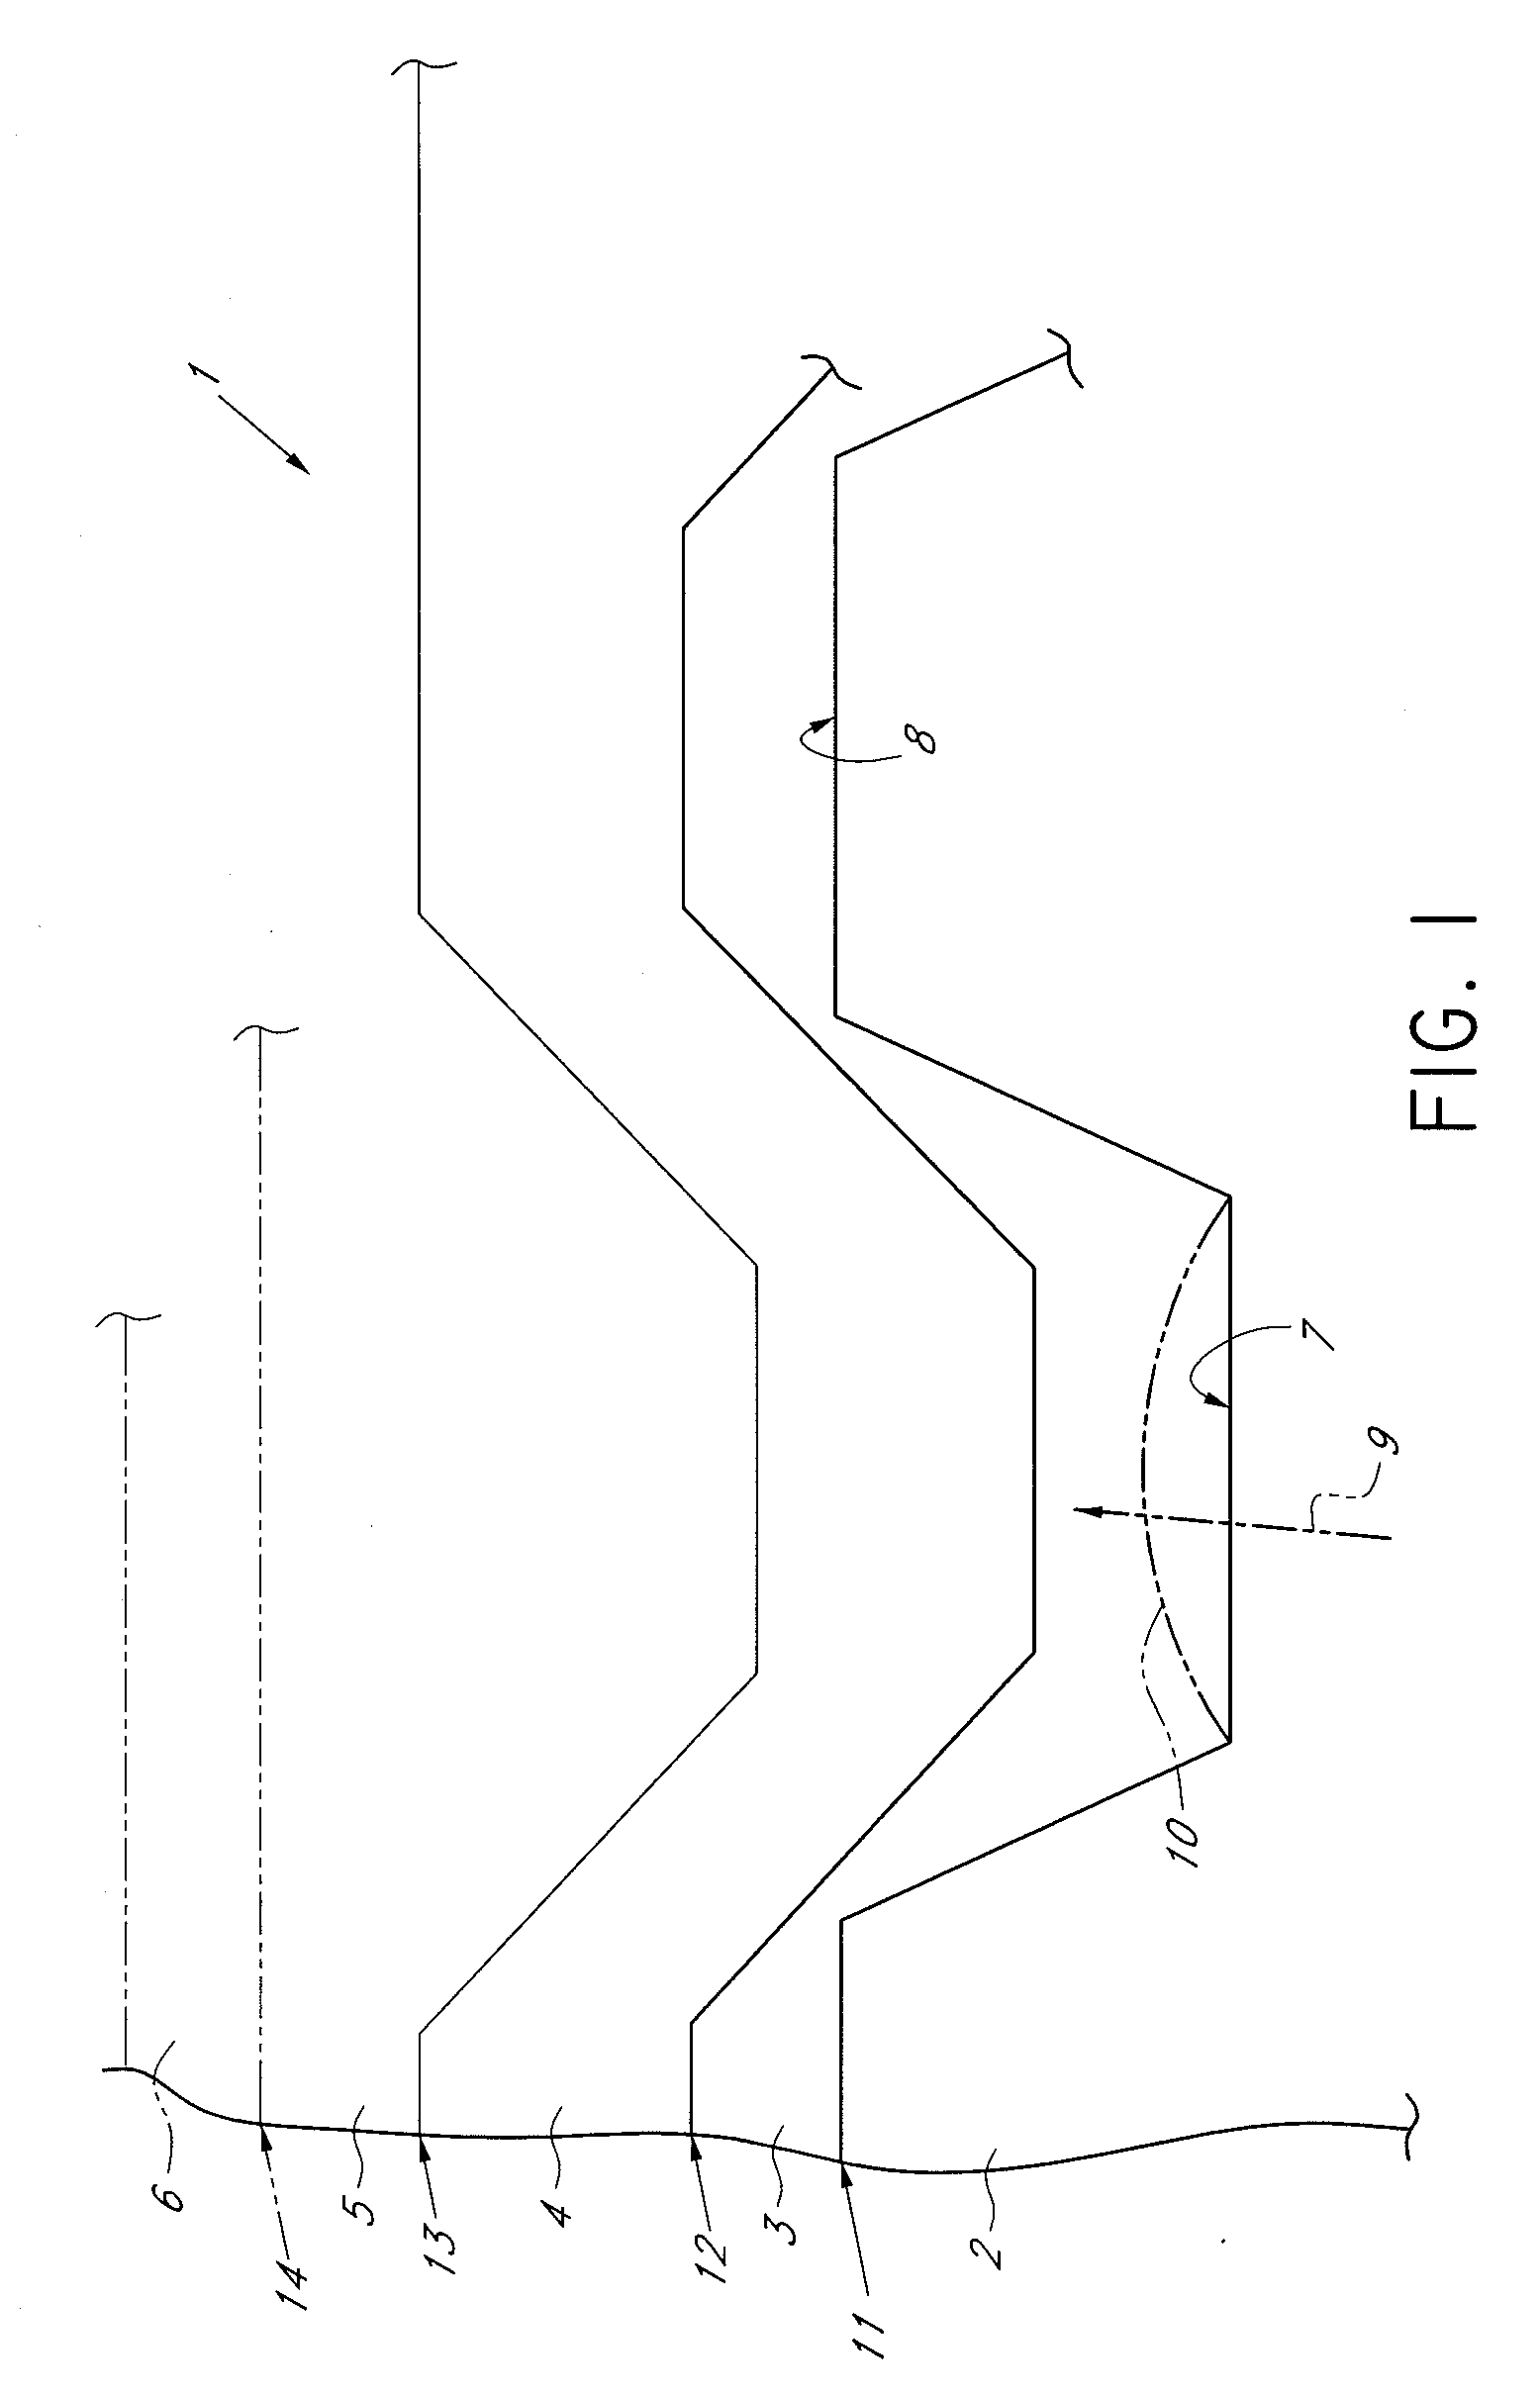 Optical information recording medium and method of producing the same